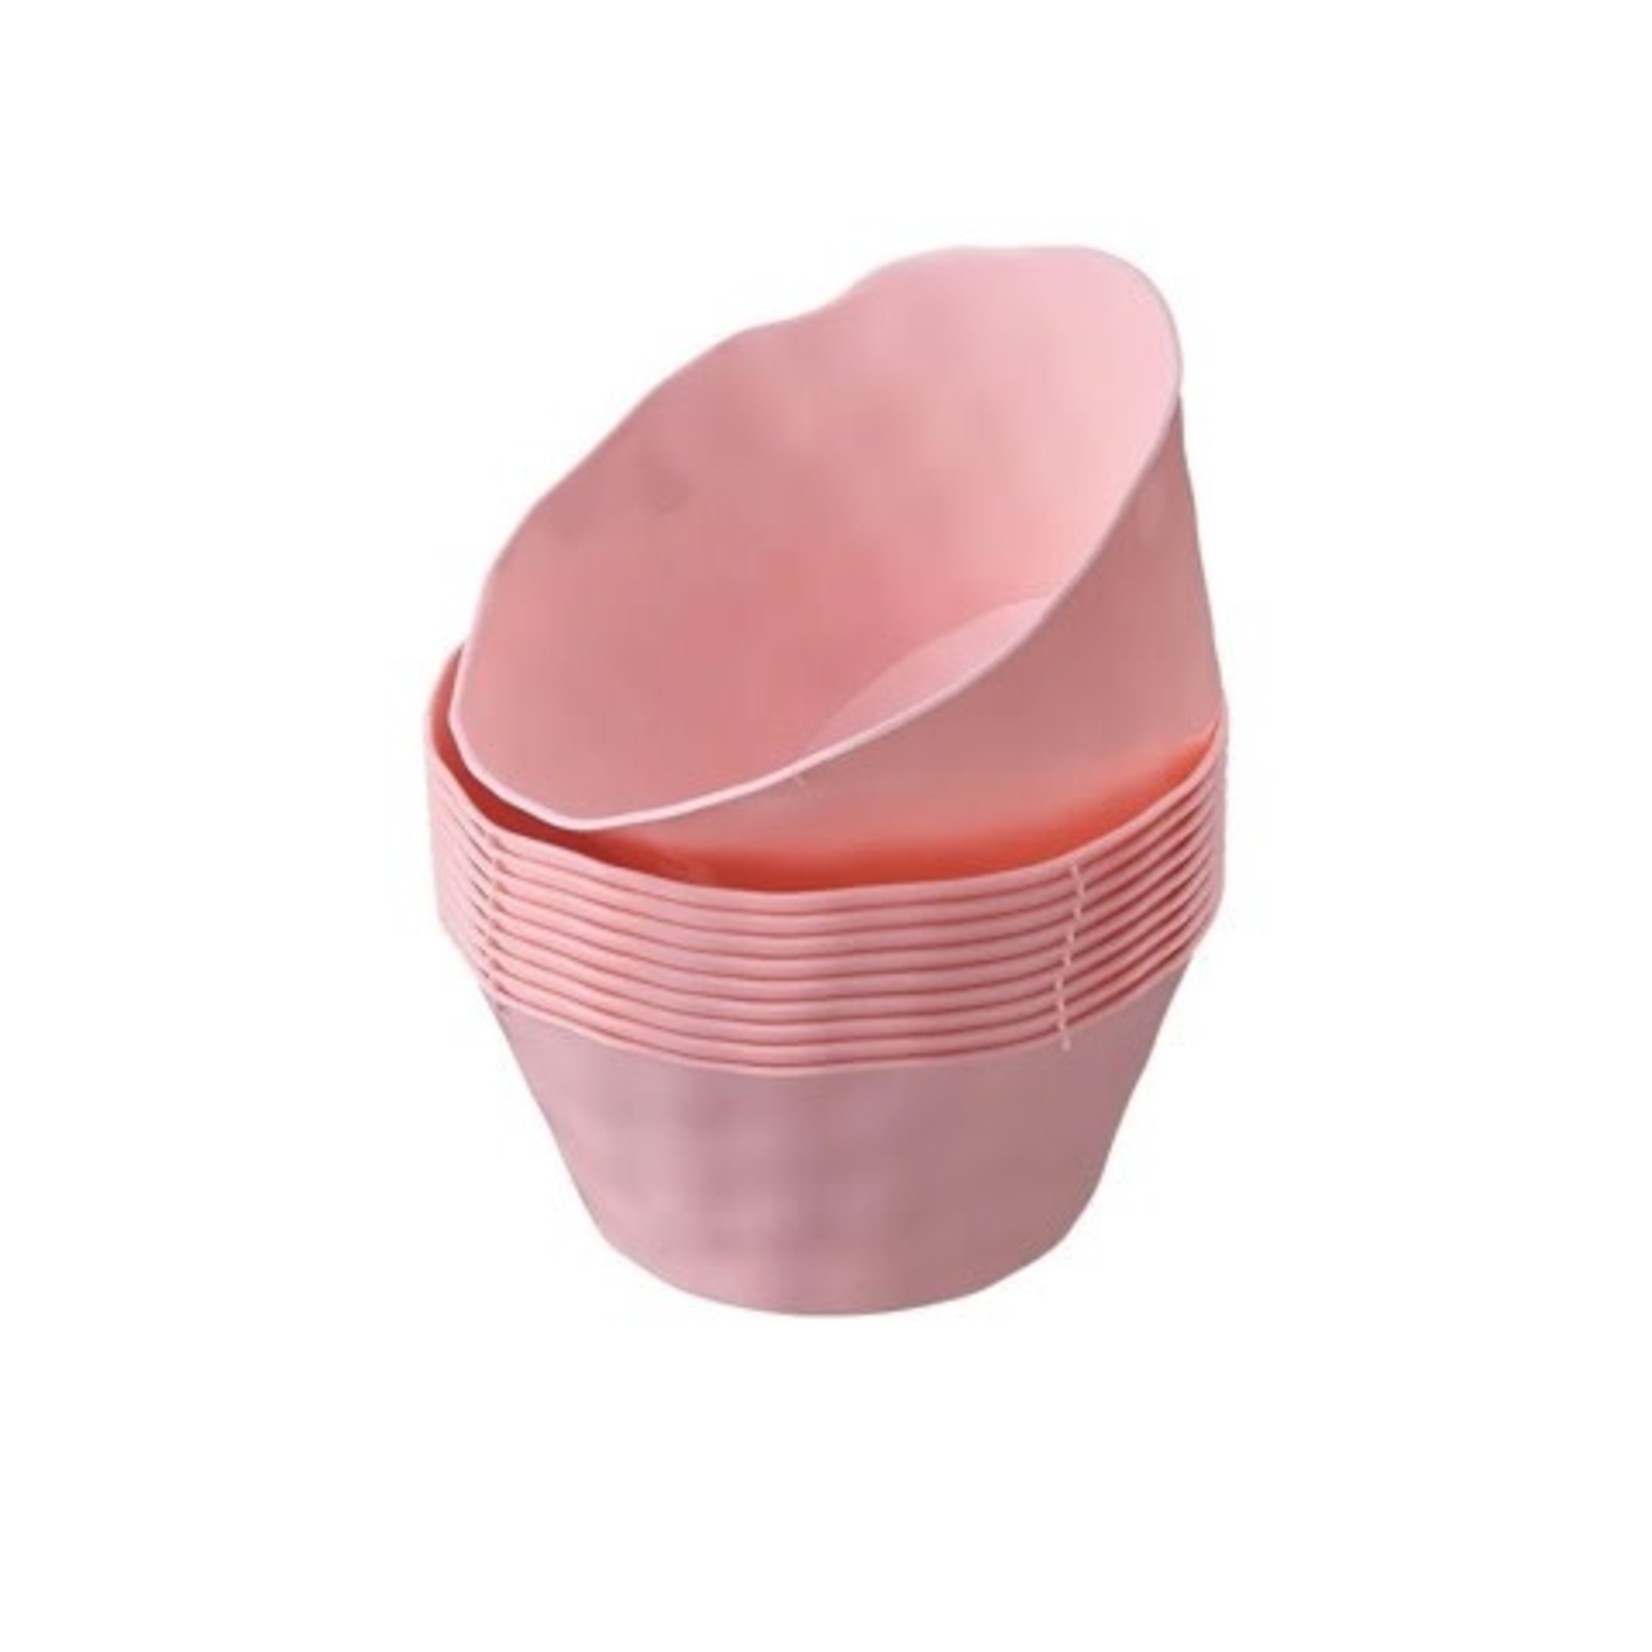 Silverspoons Lava Pink, Soup Bowls  - 10/Pack